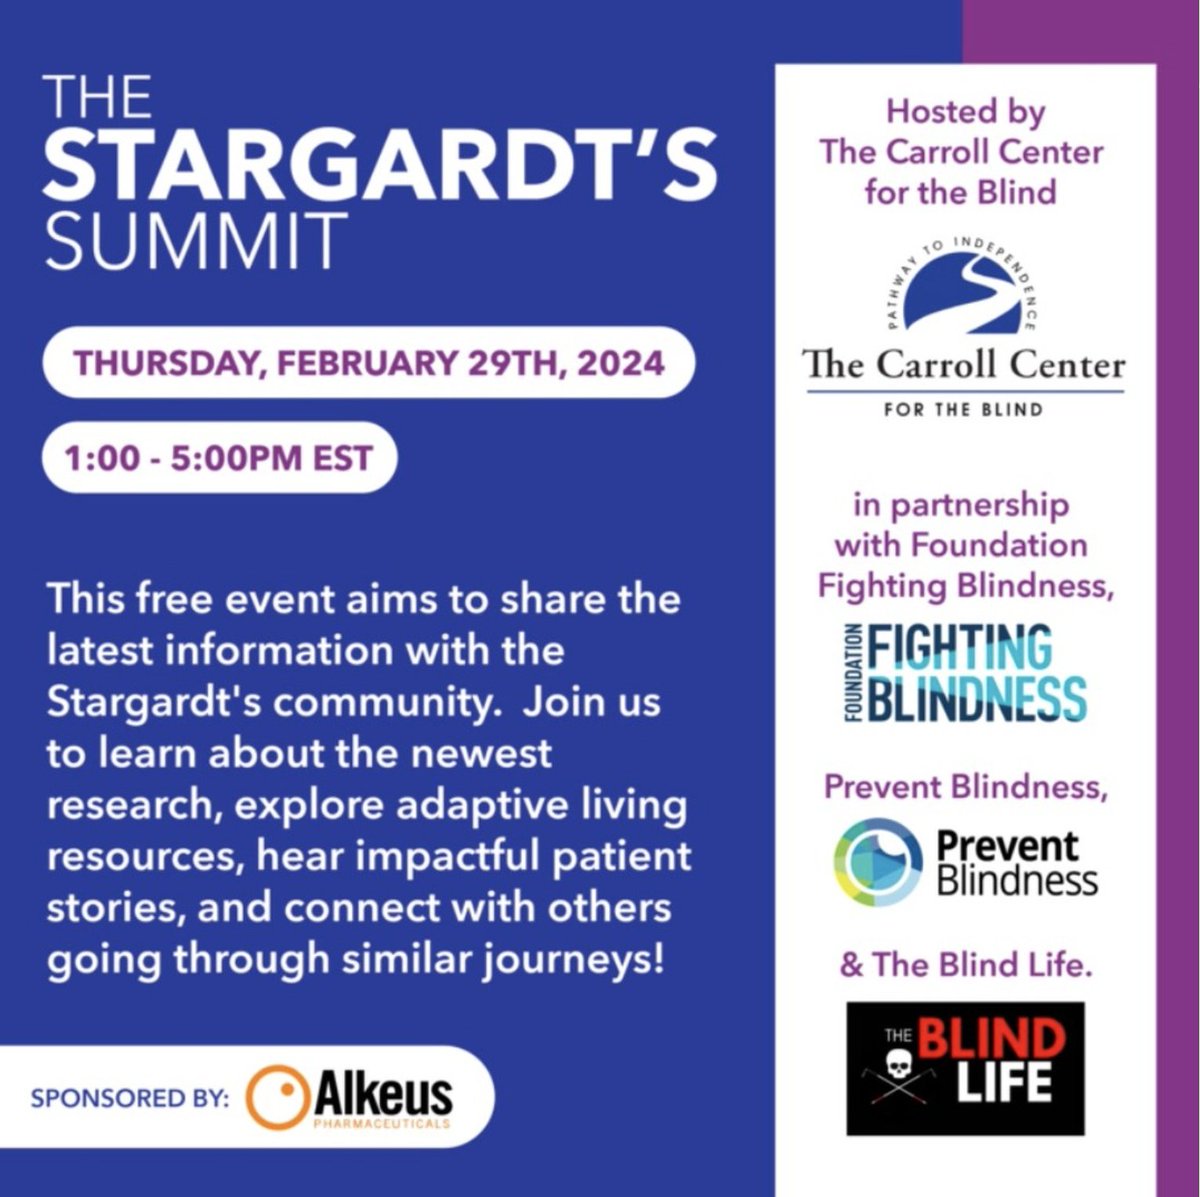 One week away! Join us and the @CarrollCenter, @FightBlindness, and the Blind Life Sam on February 29, 2024 at 1 pm ET for the virtual Stargardt's Summit! This free event is sponsored by @alkeuspharma. For more information, visit: lnkd.in/e_mKH7aa